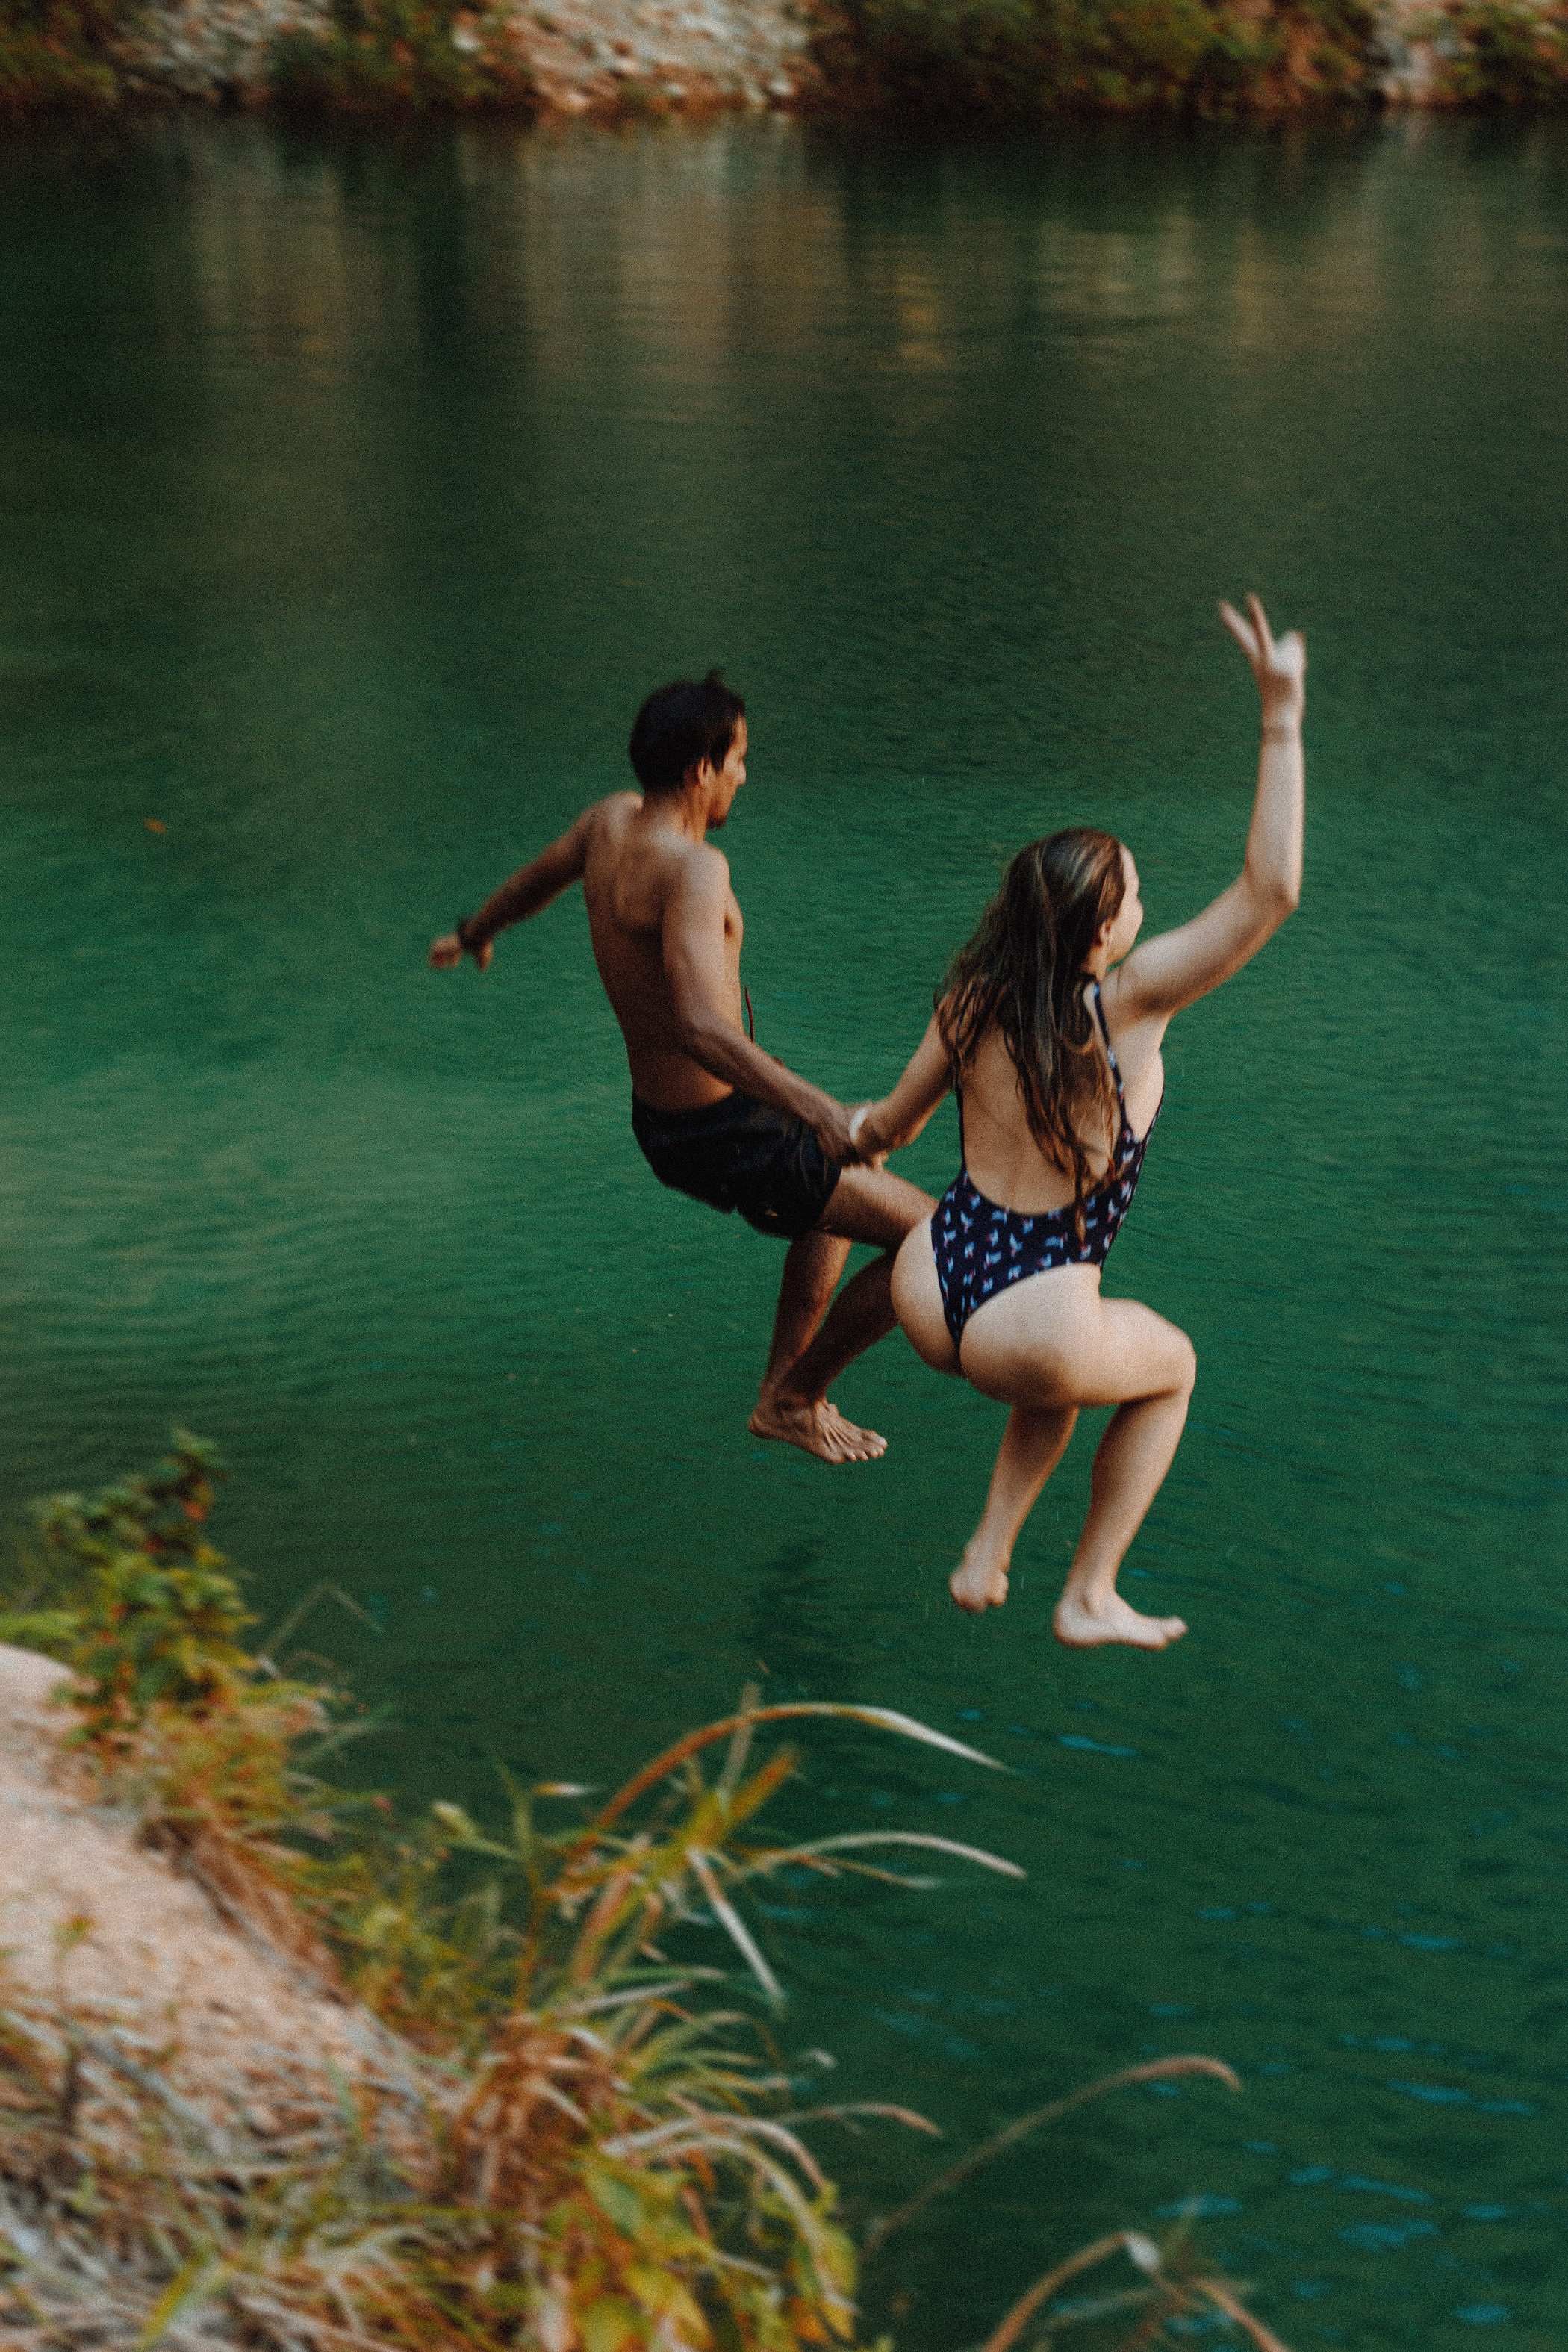 A couple jumping off a cliff into water together. | Source: Pexels